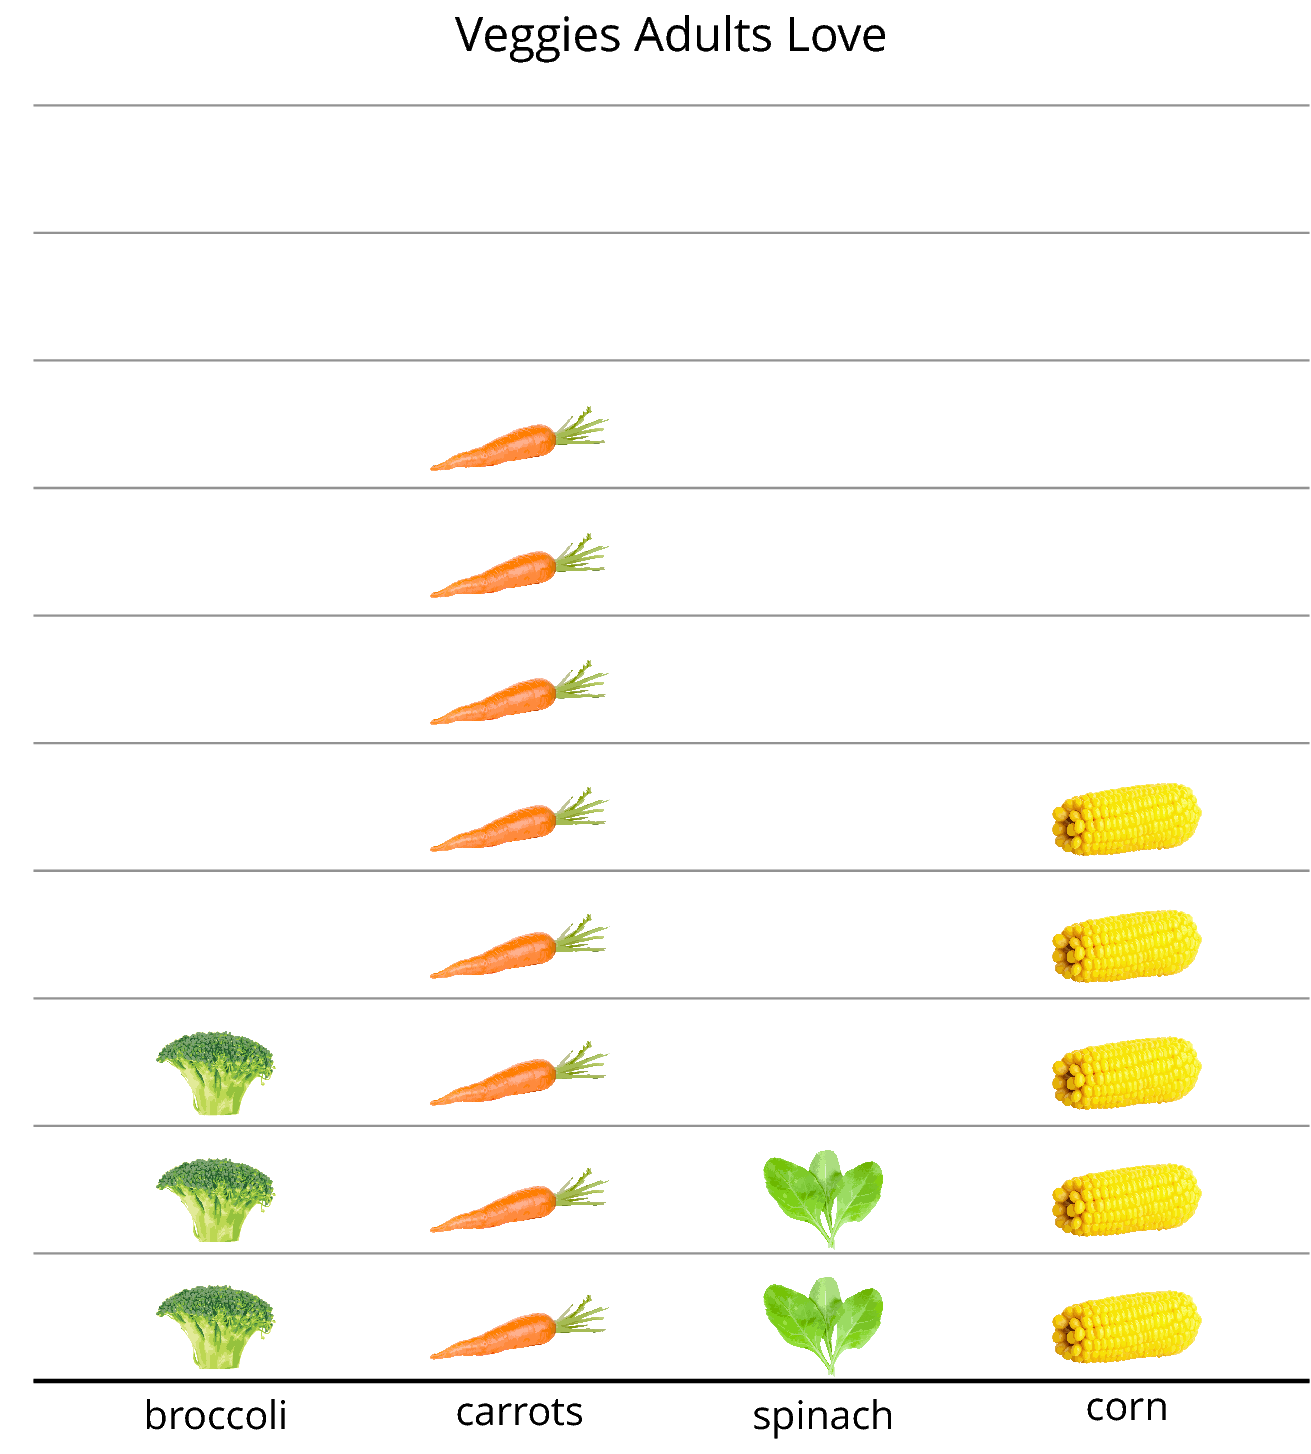 Picture Graph. Veggies Adults Love. Key: one vegetable picture represents one adult response. Broccoli, 3 broccoli pictures. Carrots, 8 carrot pictures. Spinach, 2 spinach pictures. Corn, 4 corn pictures.